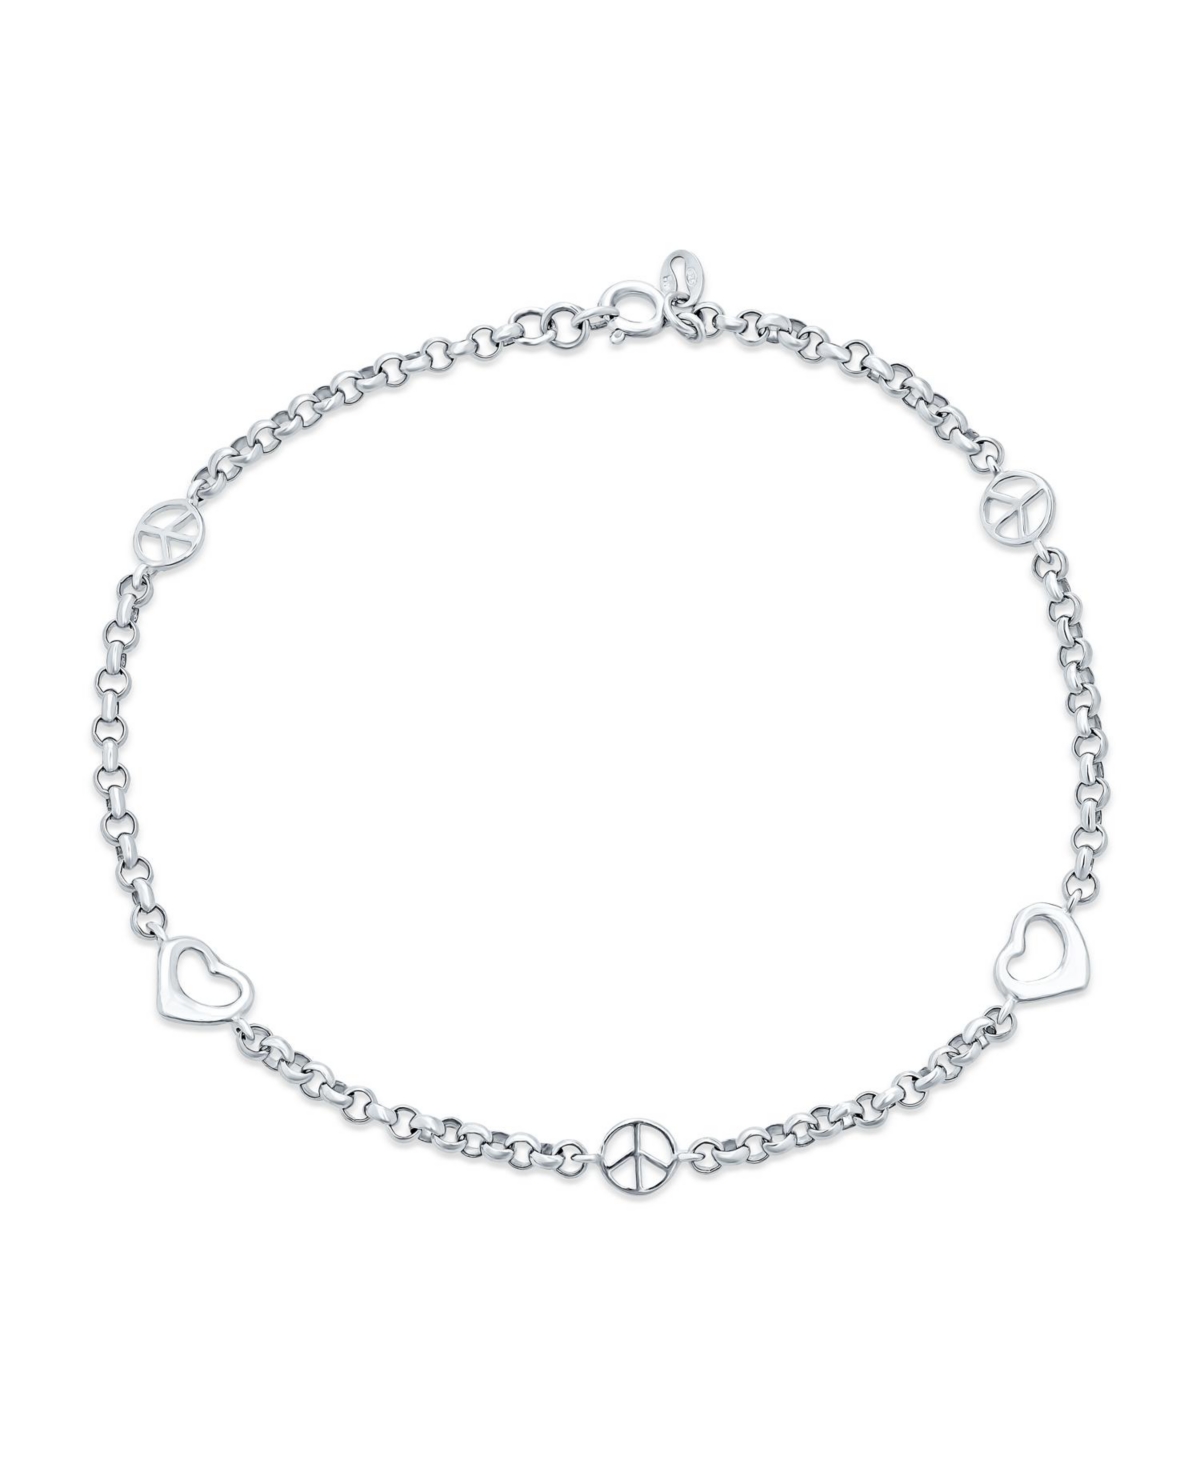 Peace Sign Love Open Interlocking Hearts Anklet Ankle Bracelet For Women .925 Sterling Silver Adjustable 9 To 10 Inch - Silver tone